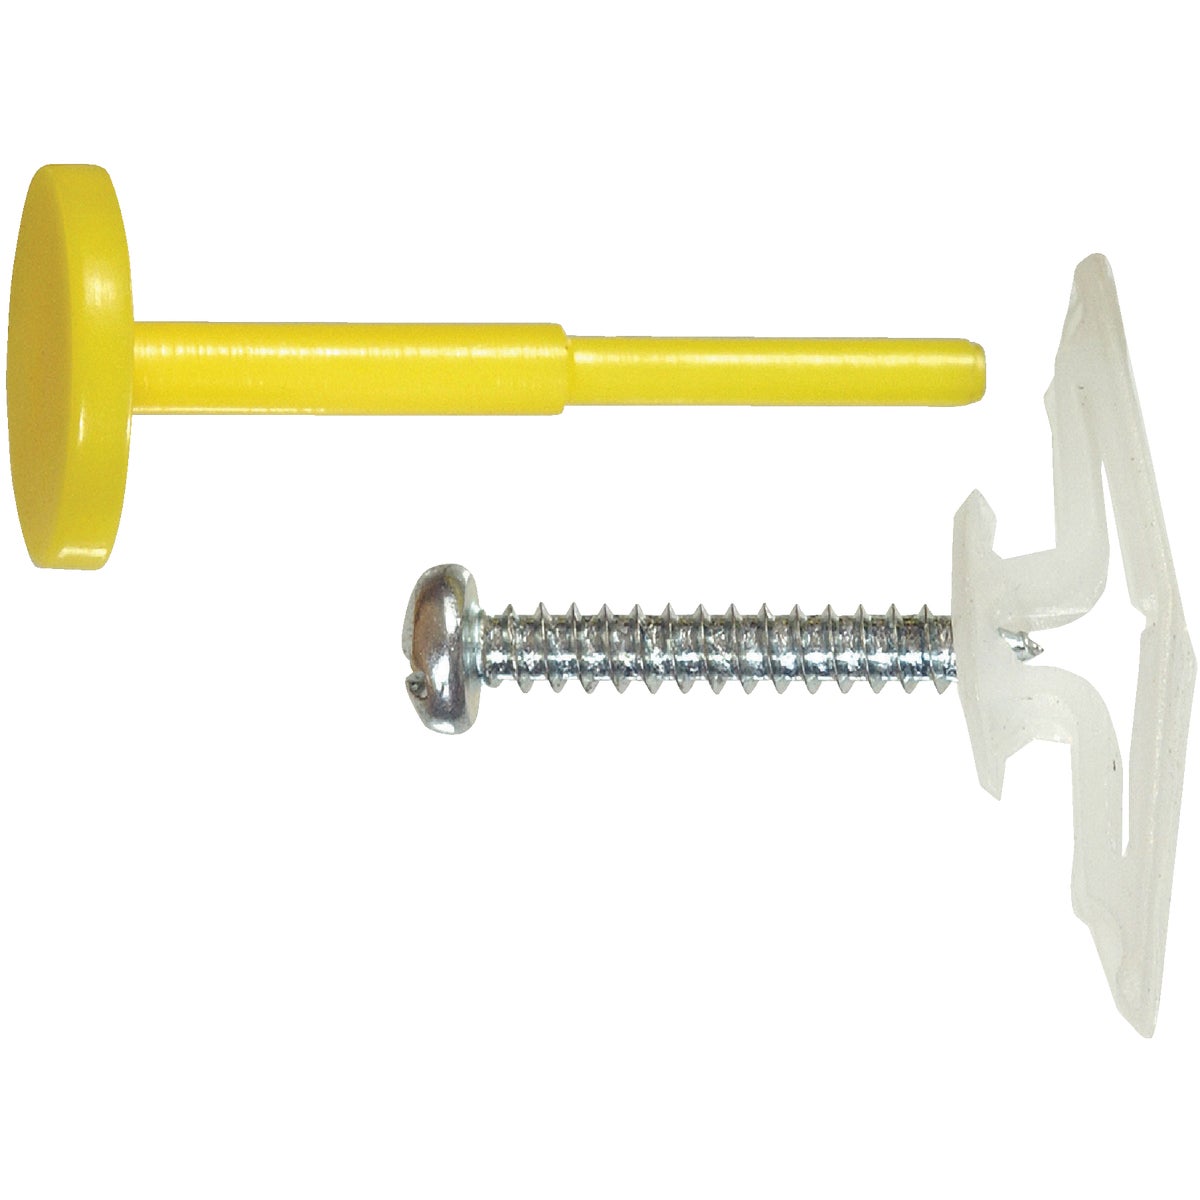 Hillman 5/8 In. Large Yellow Plastic Toggle Anchor (10 Ct.)